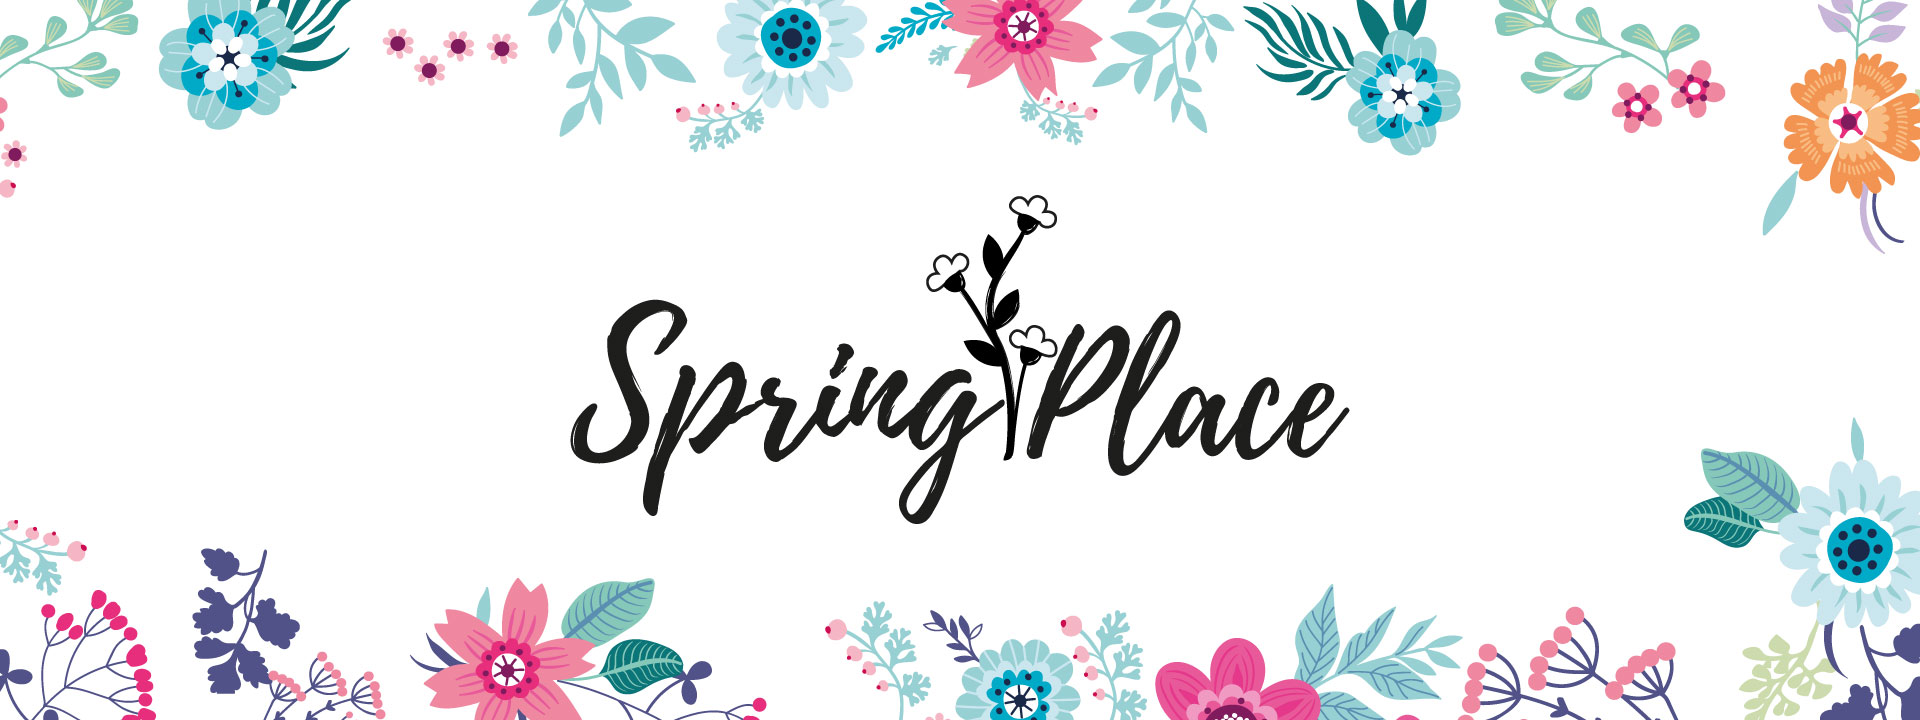 Sping Place